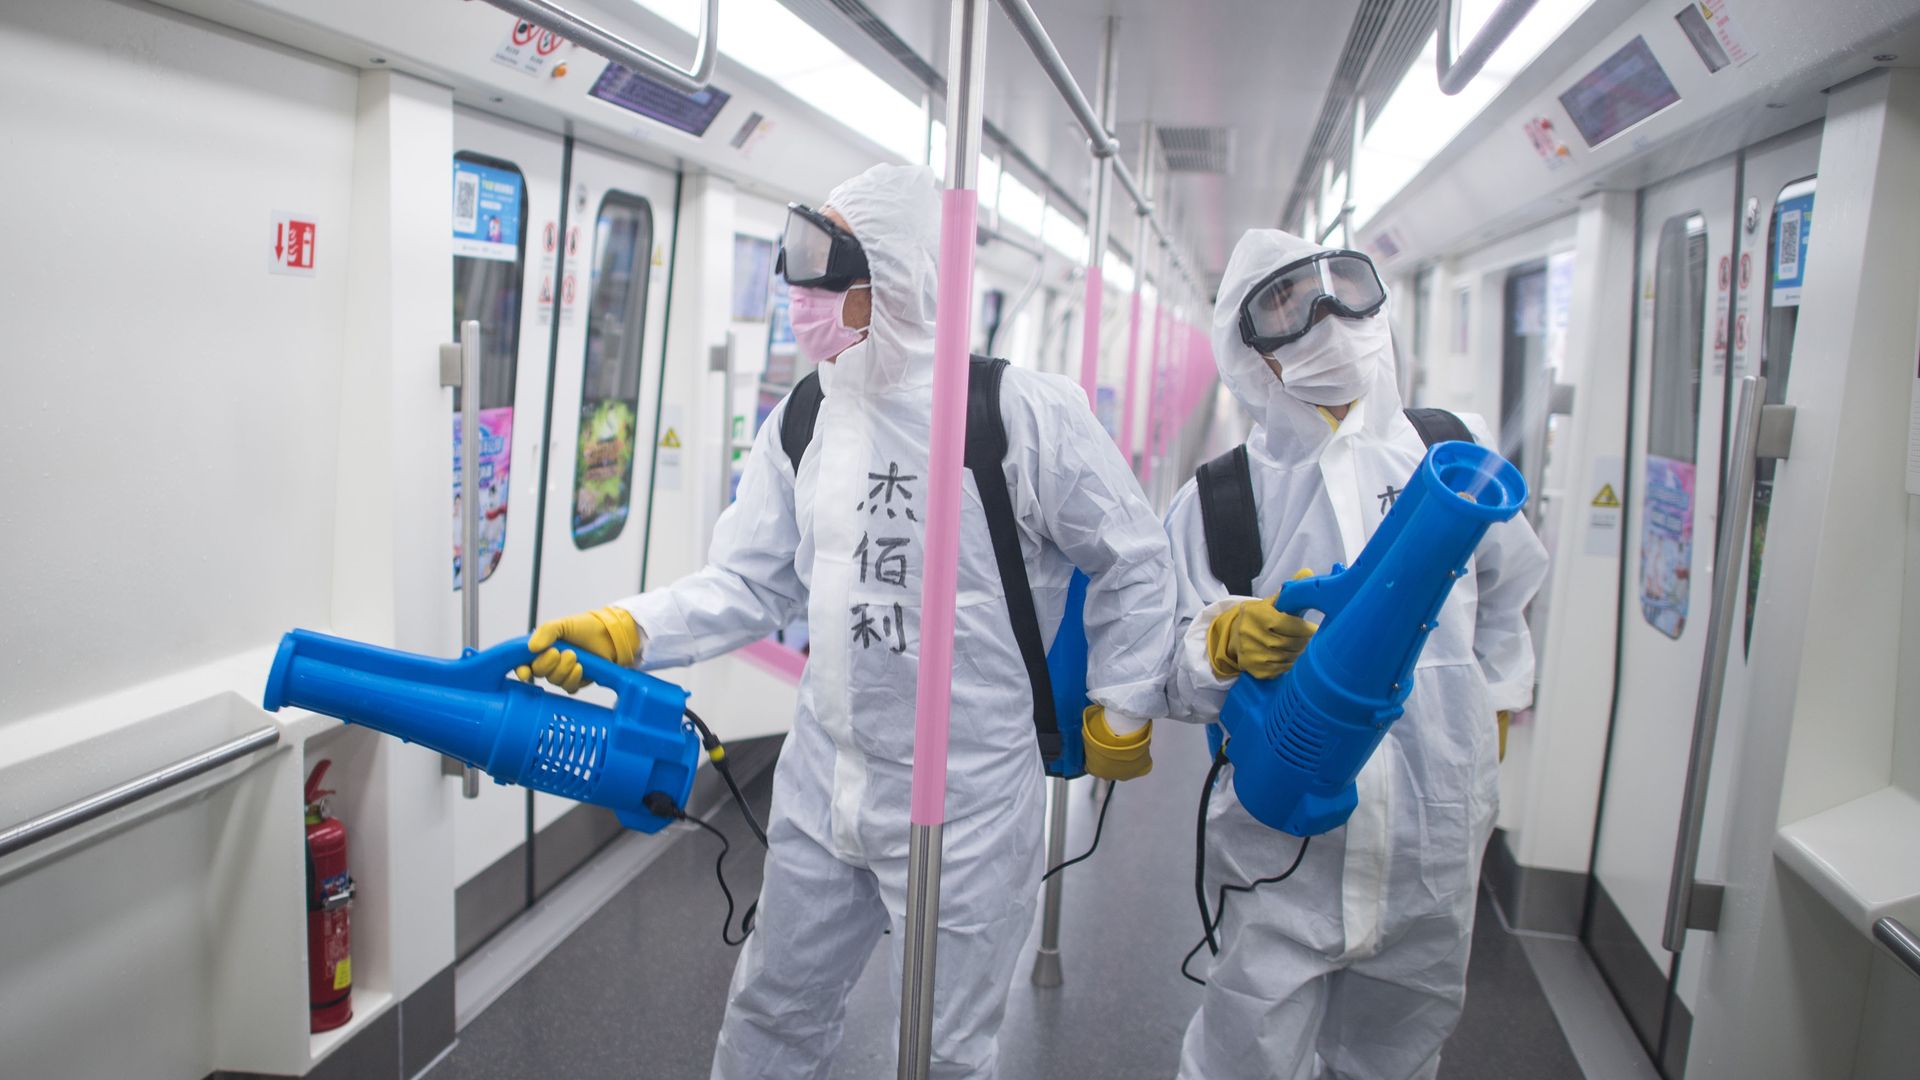 Staff members conduct disinfection on the subway train at a train depot in Wuhan, central China's Hubei Province, March 23